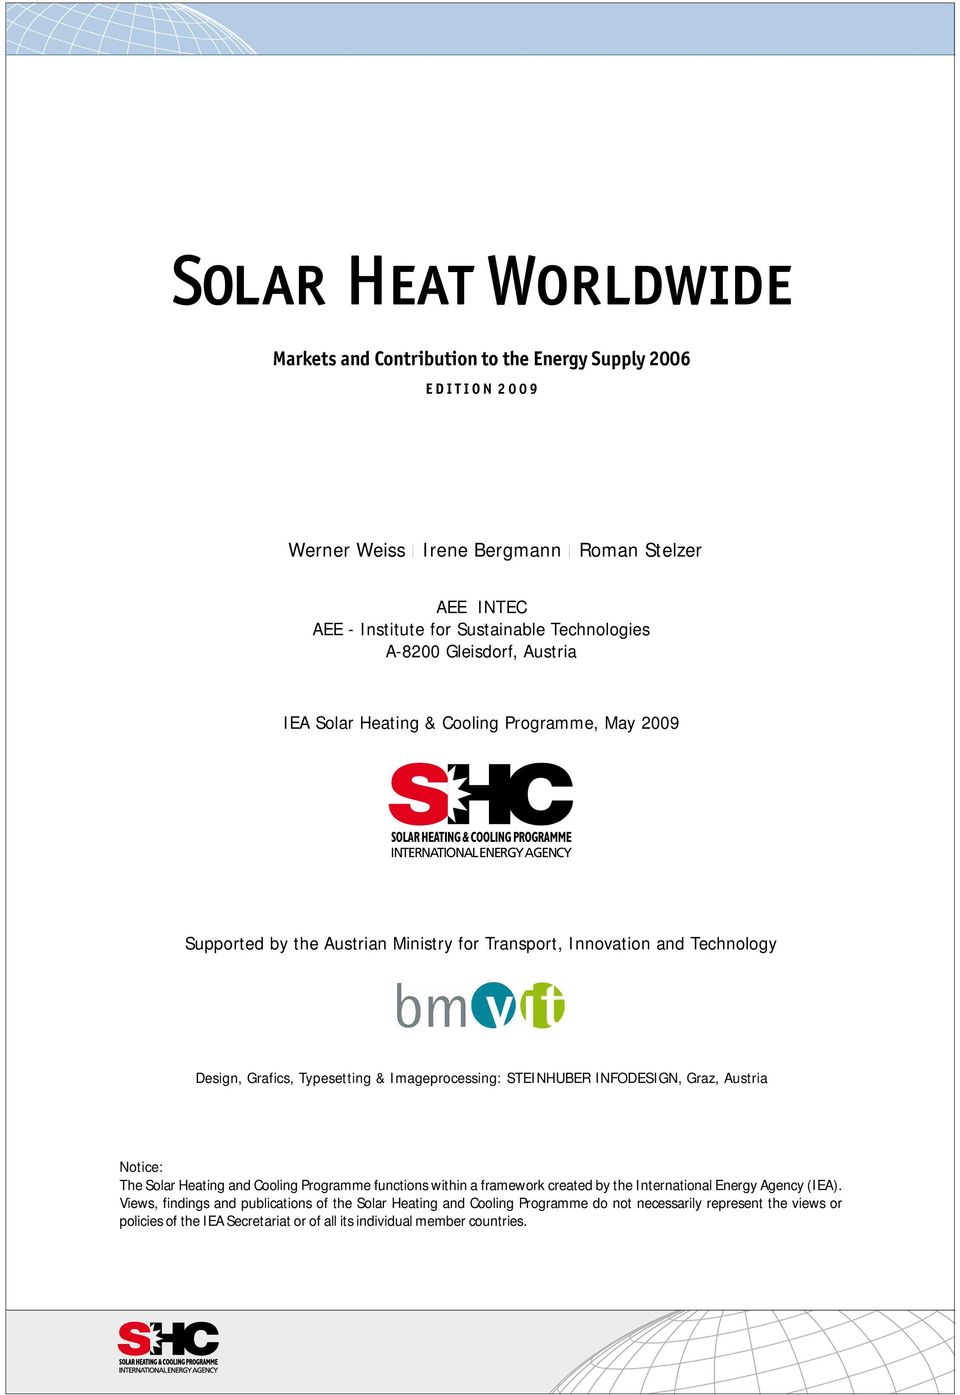 Technology Design, Grafics, Typesetting & Imageprocessing: STEINHUBER INFODESIGN, Graz, Austria Notice: The Solar Heating and Cooling Programme functions within a framework created by the